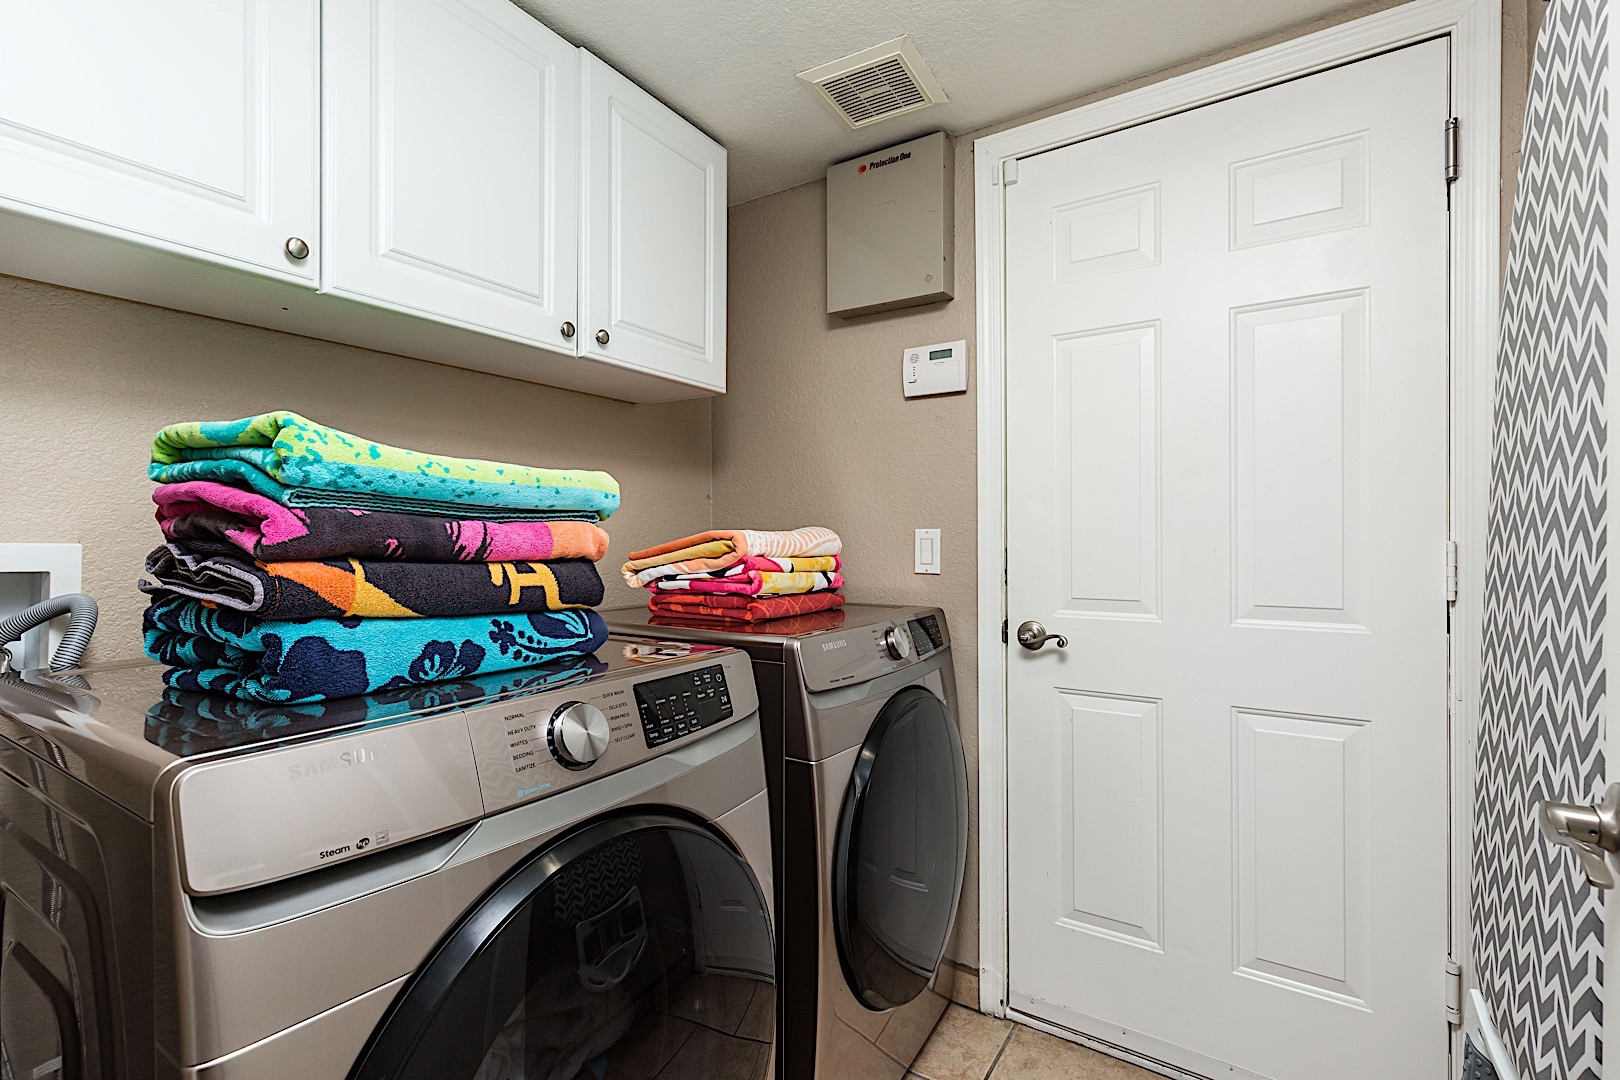 Extra laundry after a day in the pool? No worries, this full sized washer and dryer can handle that for you.